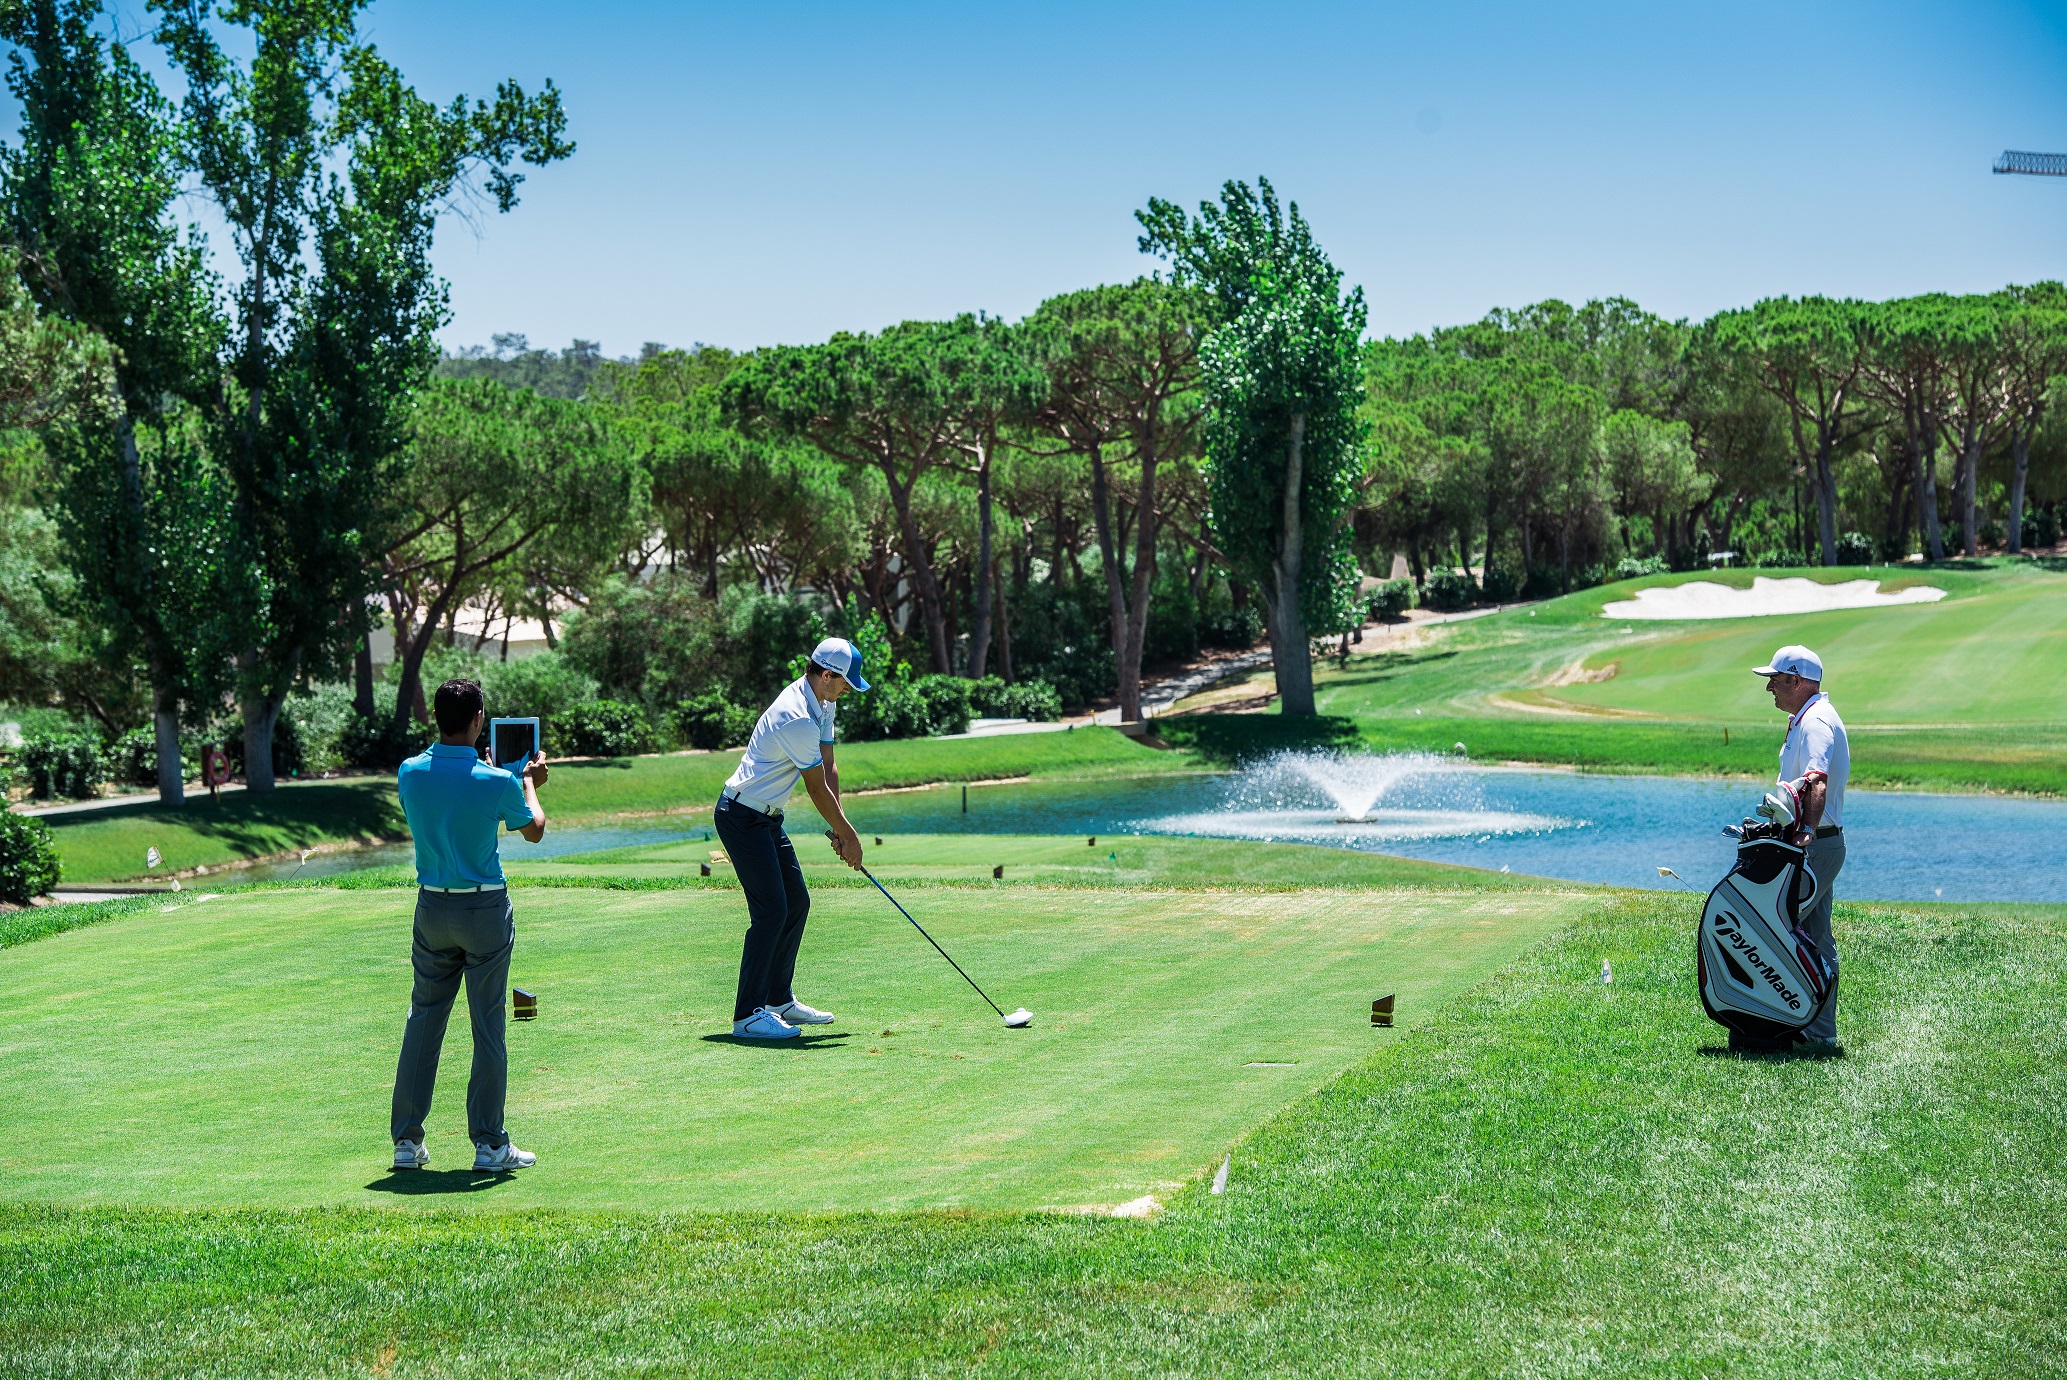 Quinta do Lago takes tuition online with new golf academy